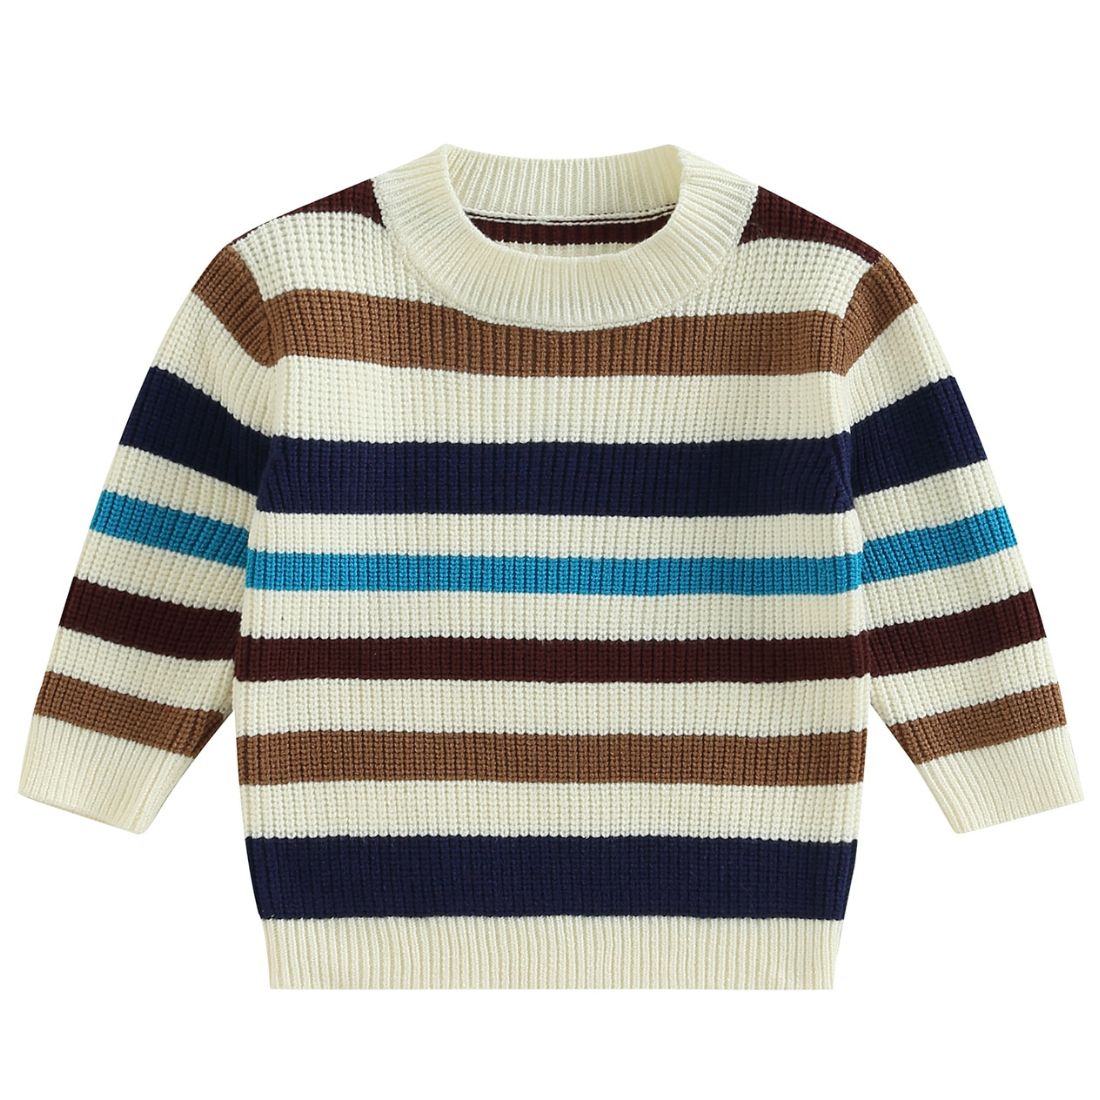 Blue and Brown Striped Knit Toddler Pullover